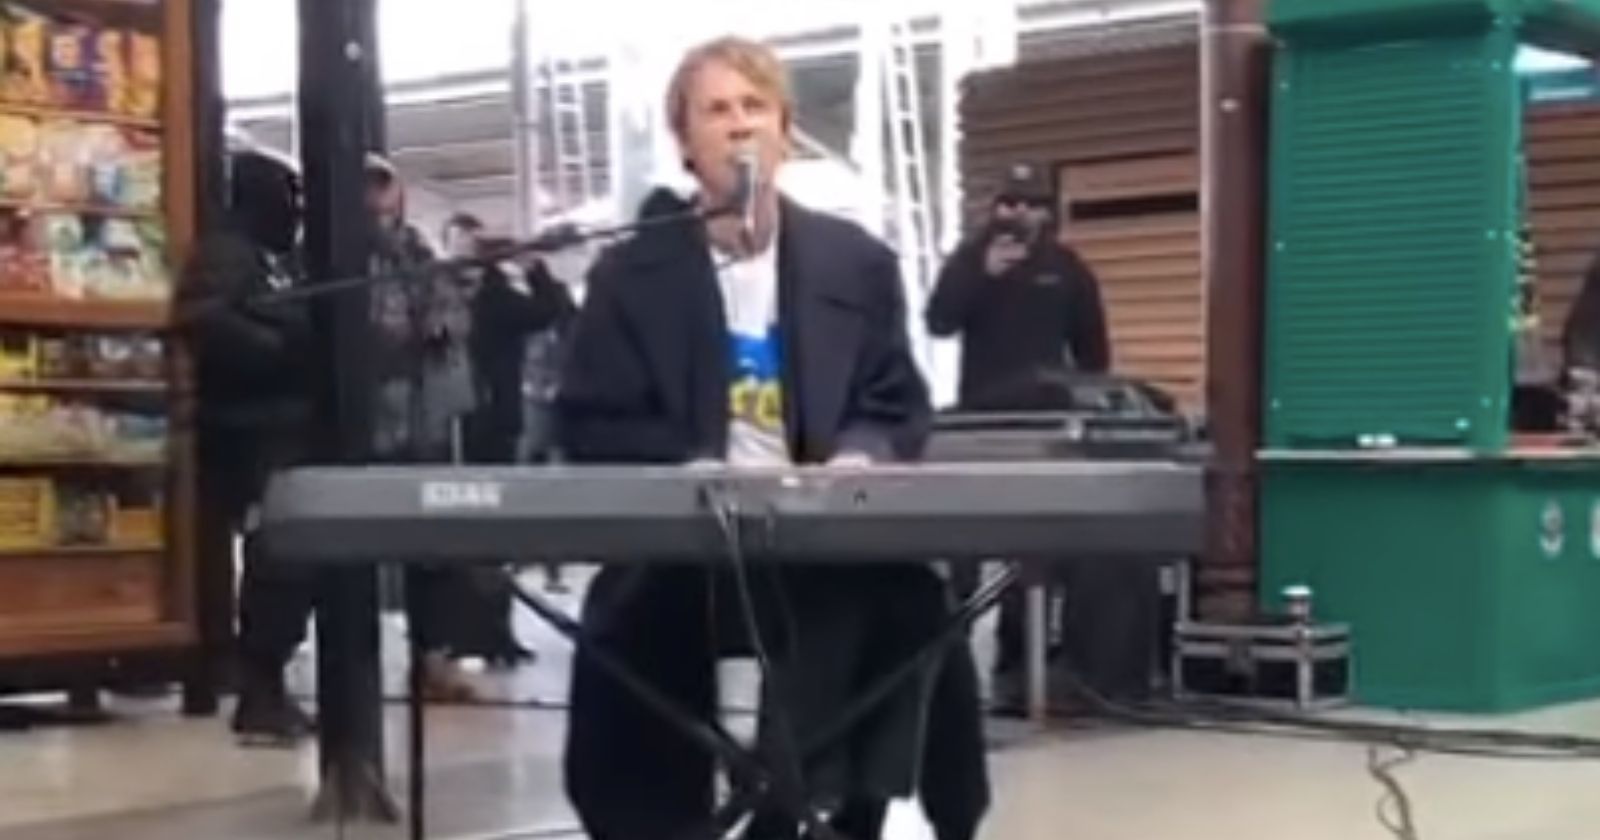 VIDEO.  At Bucharest train station, Tom Odell welcomes Ukrainian refugees by singing "Another Love"